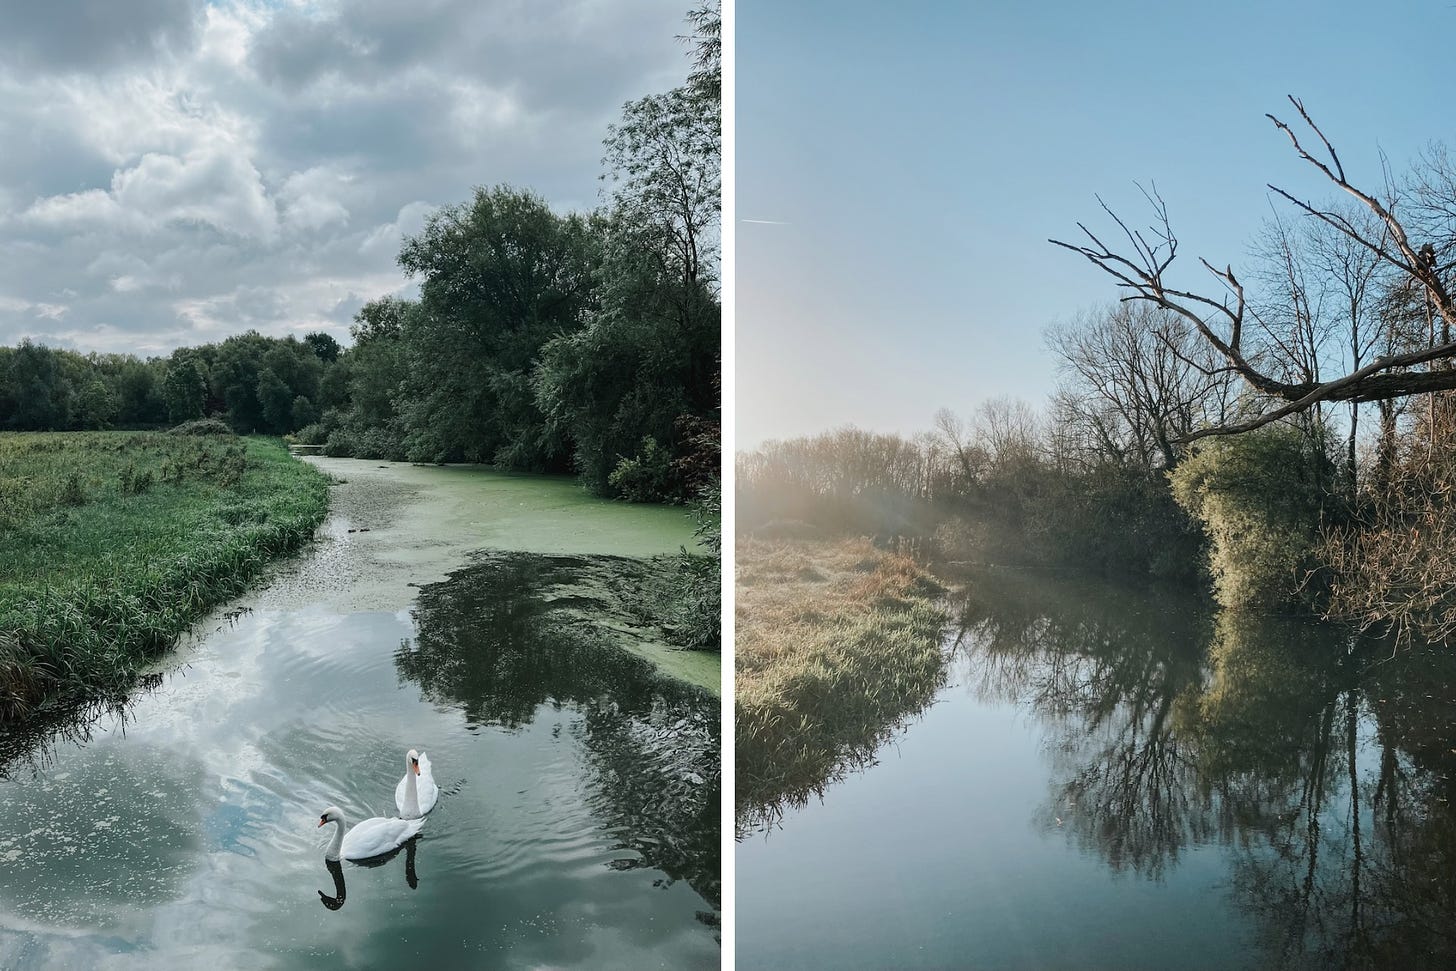 Two views of a river, one with greenery and swans, the other with leafless trees and browned meadow